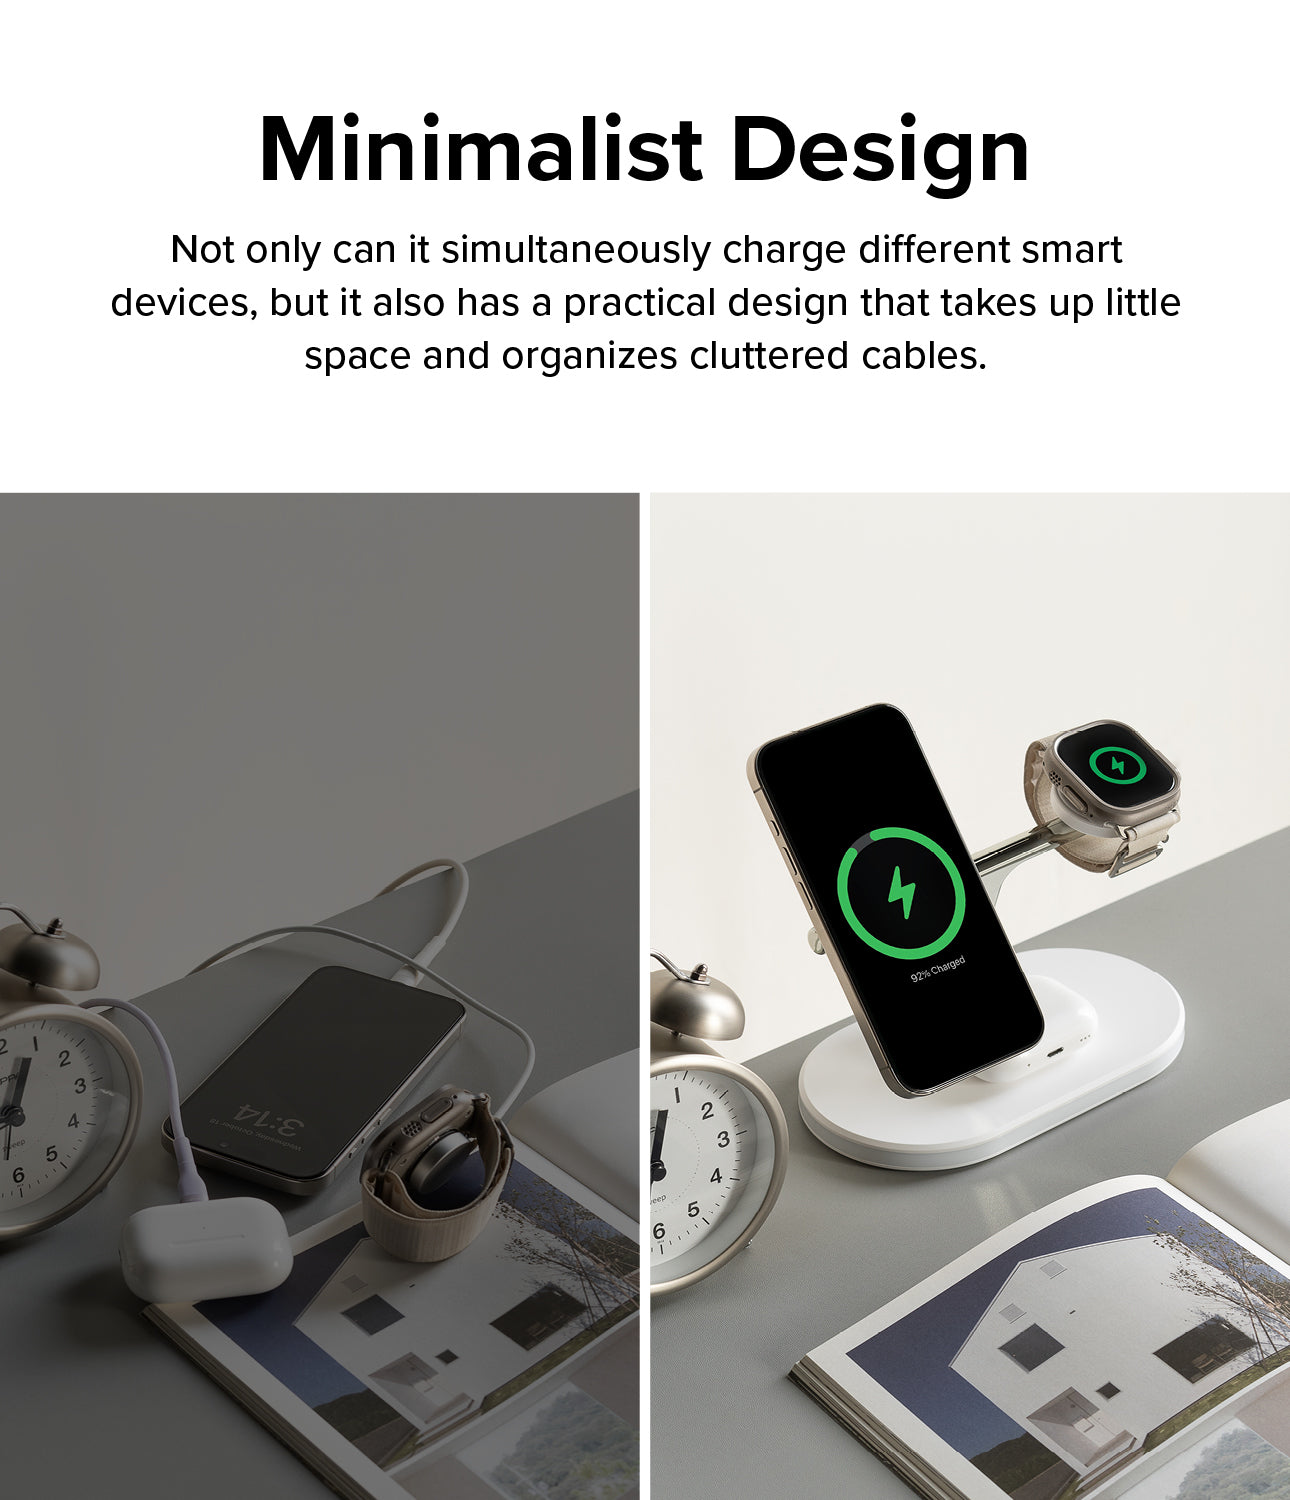 Ringke 3-in-1 Wireless Charger Stand - Minimalist Design. Not only can it simultaneously charge different smart devices, but it also has a practical design that takes up little space and organizes cluttered cables.